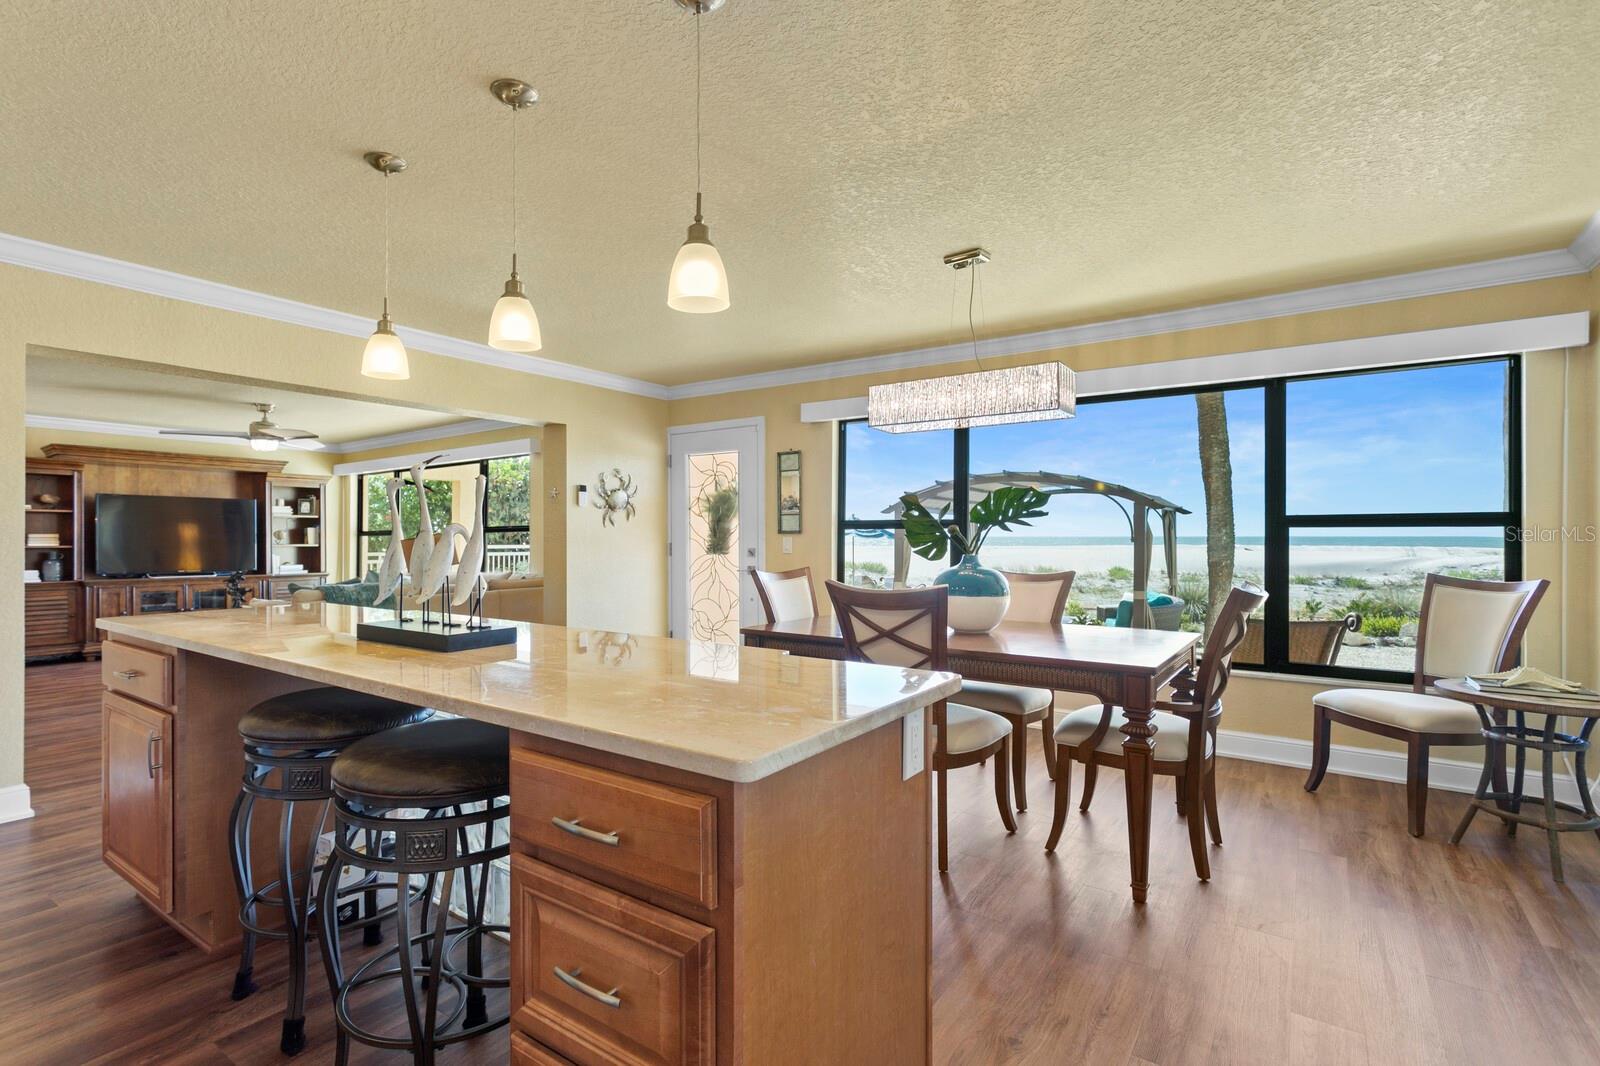 Enter into your beach home with its open floor plan design and an abundance of natural Florida light. Crown Molding, newer LVP flooring, newer windows and newer custom doors.